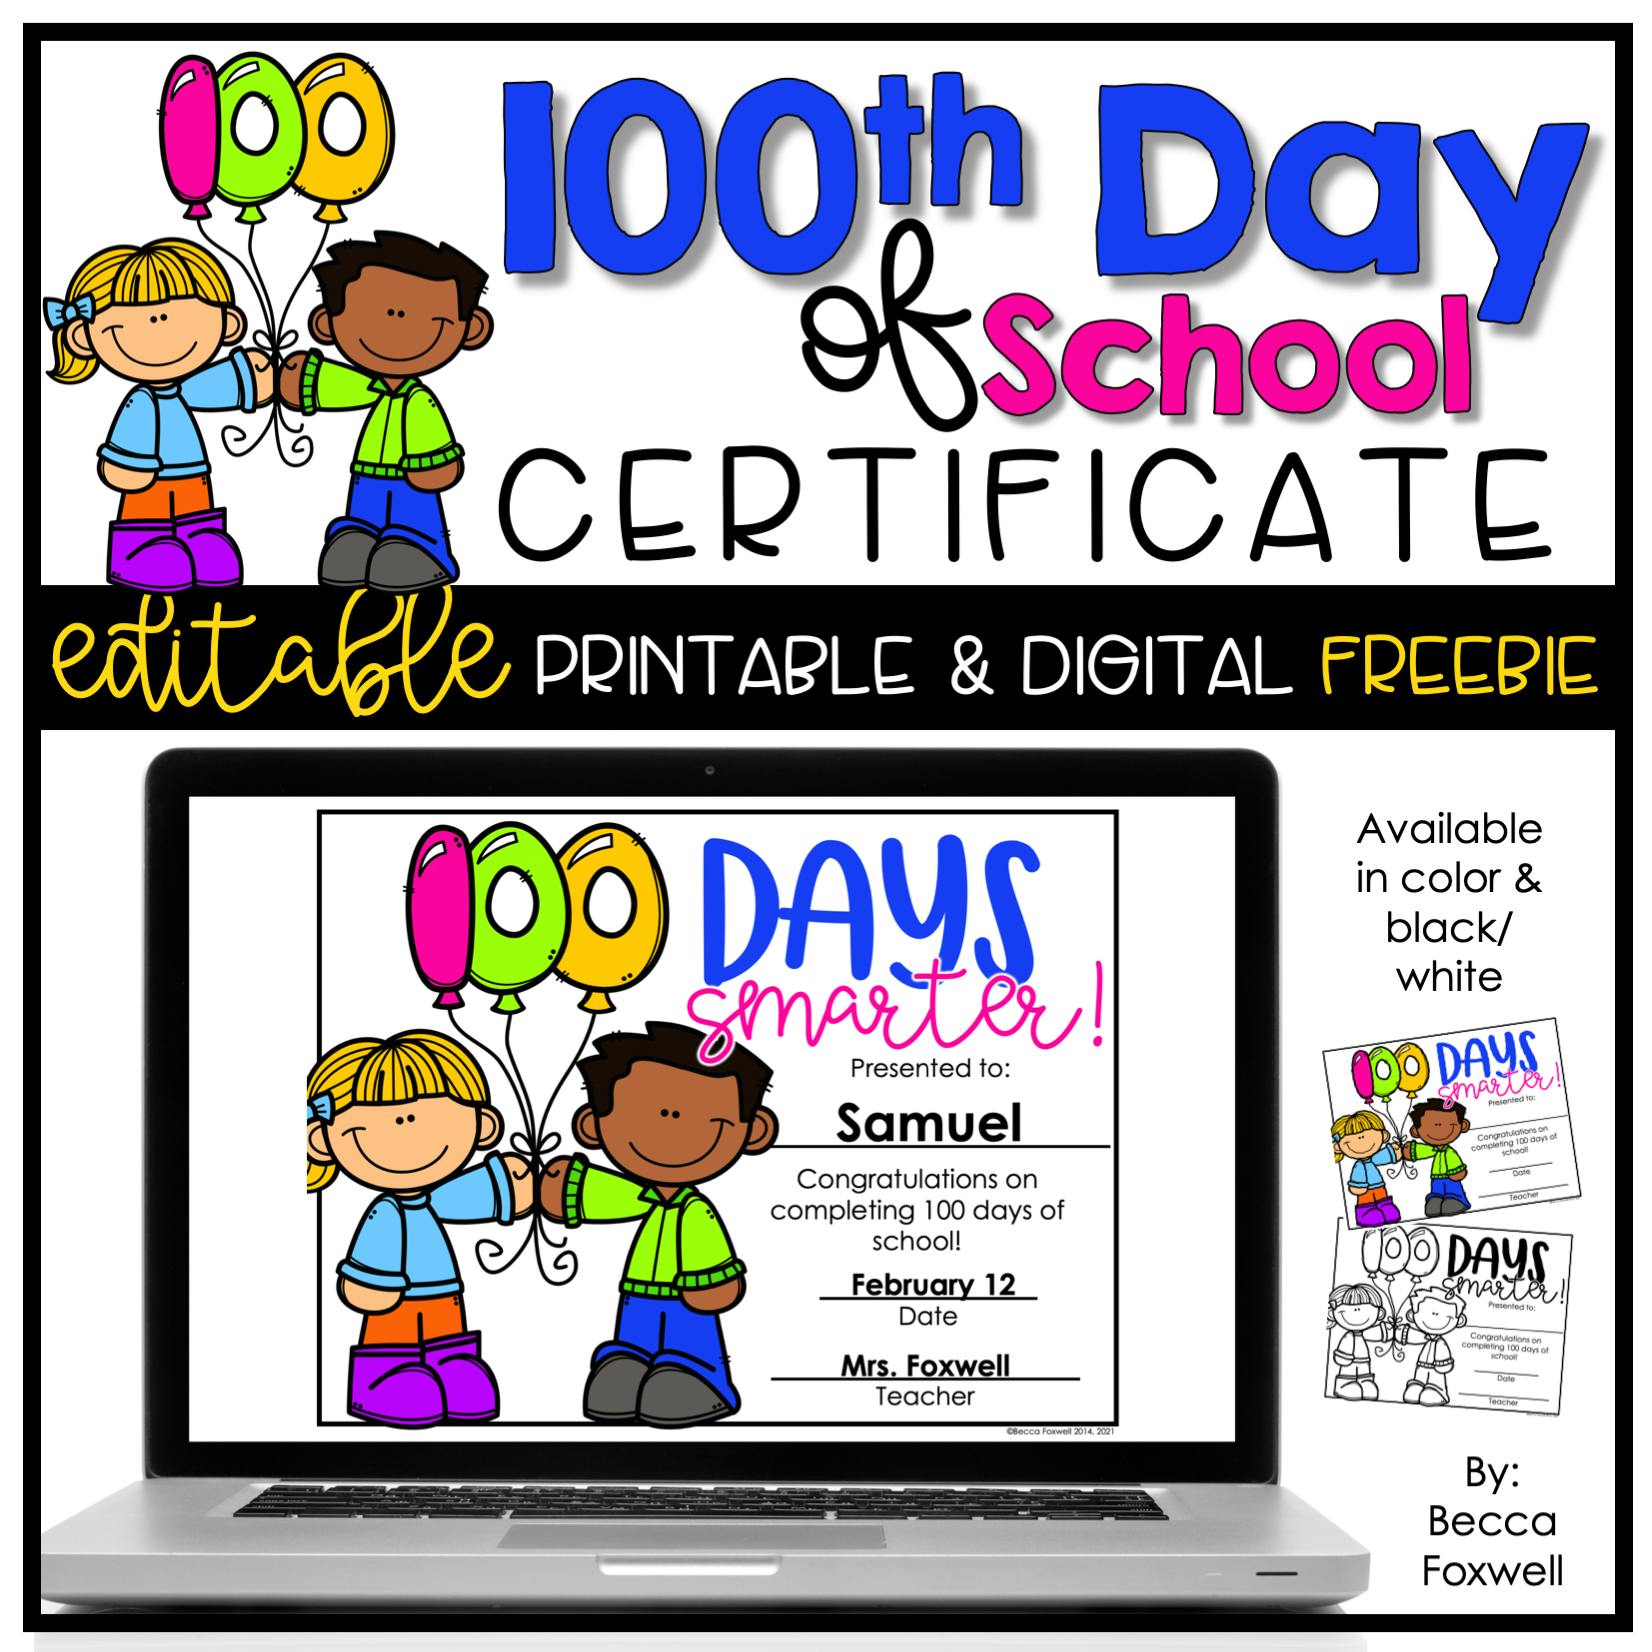 100th-day-of-school-certificate